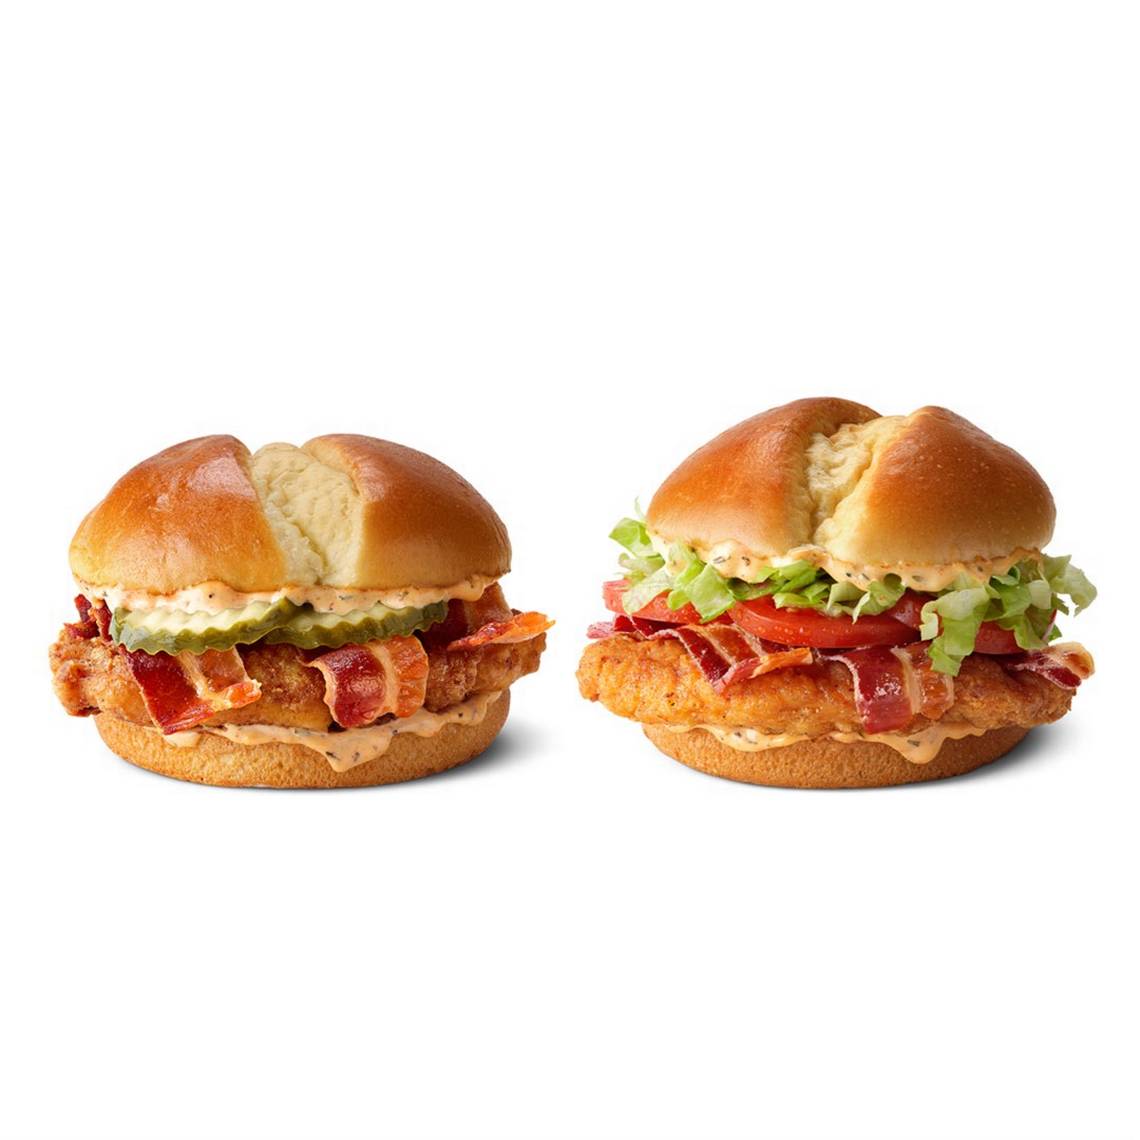 Can new McDonald’s Cajun chicken sandwich match Popeyes? Take a look at the taste test